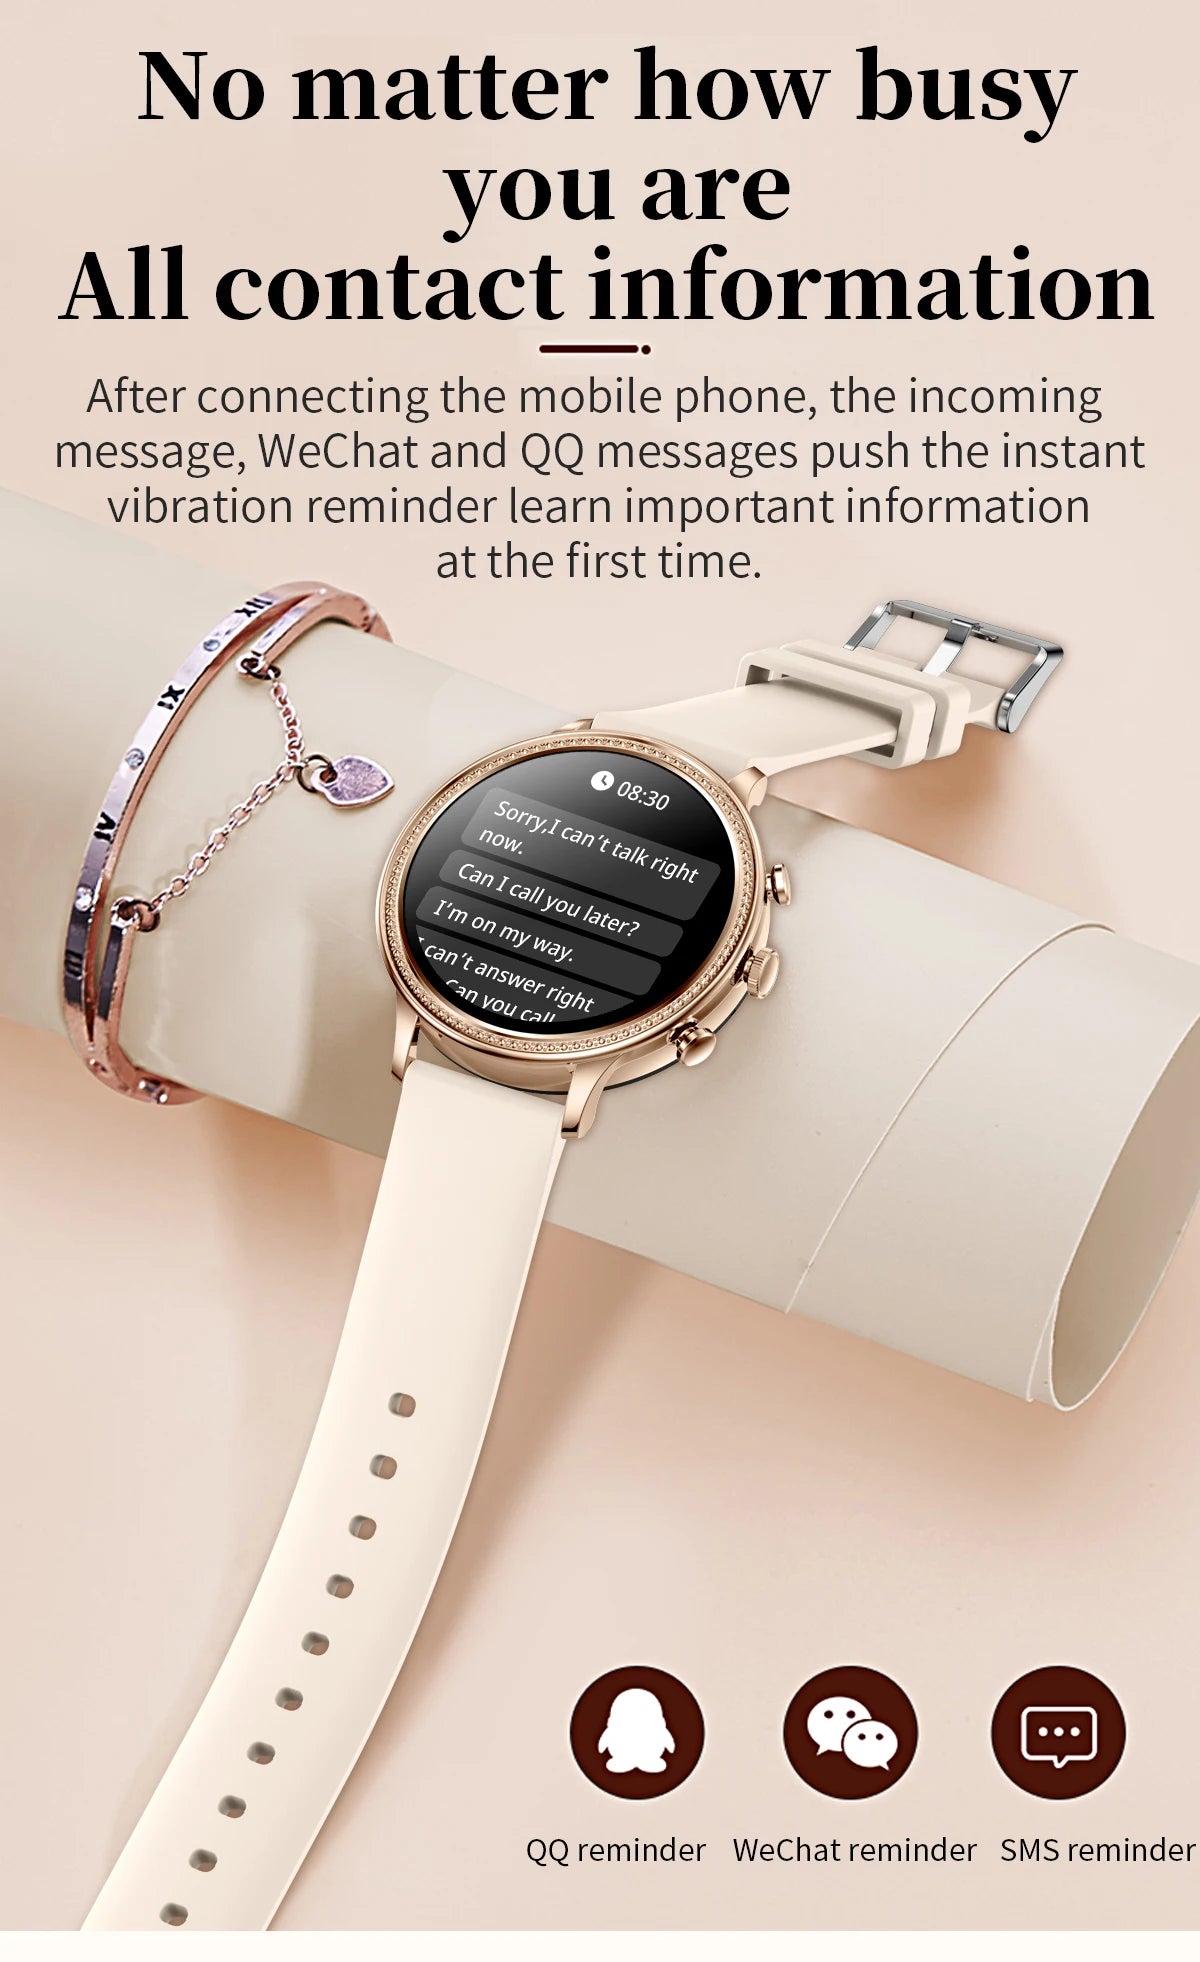 XIAOMI Mijia Luxury Women Smartwatch Bluetooth Call Connection/Ladies Watch Health Heart Rate Monitor Smart Watches